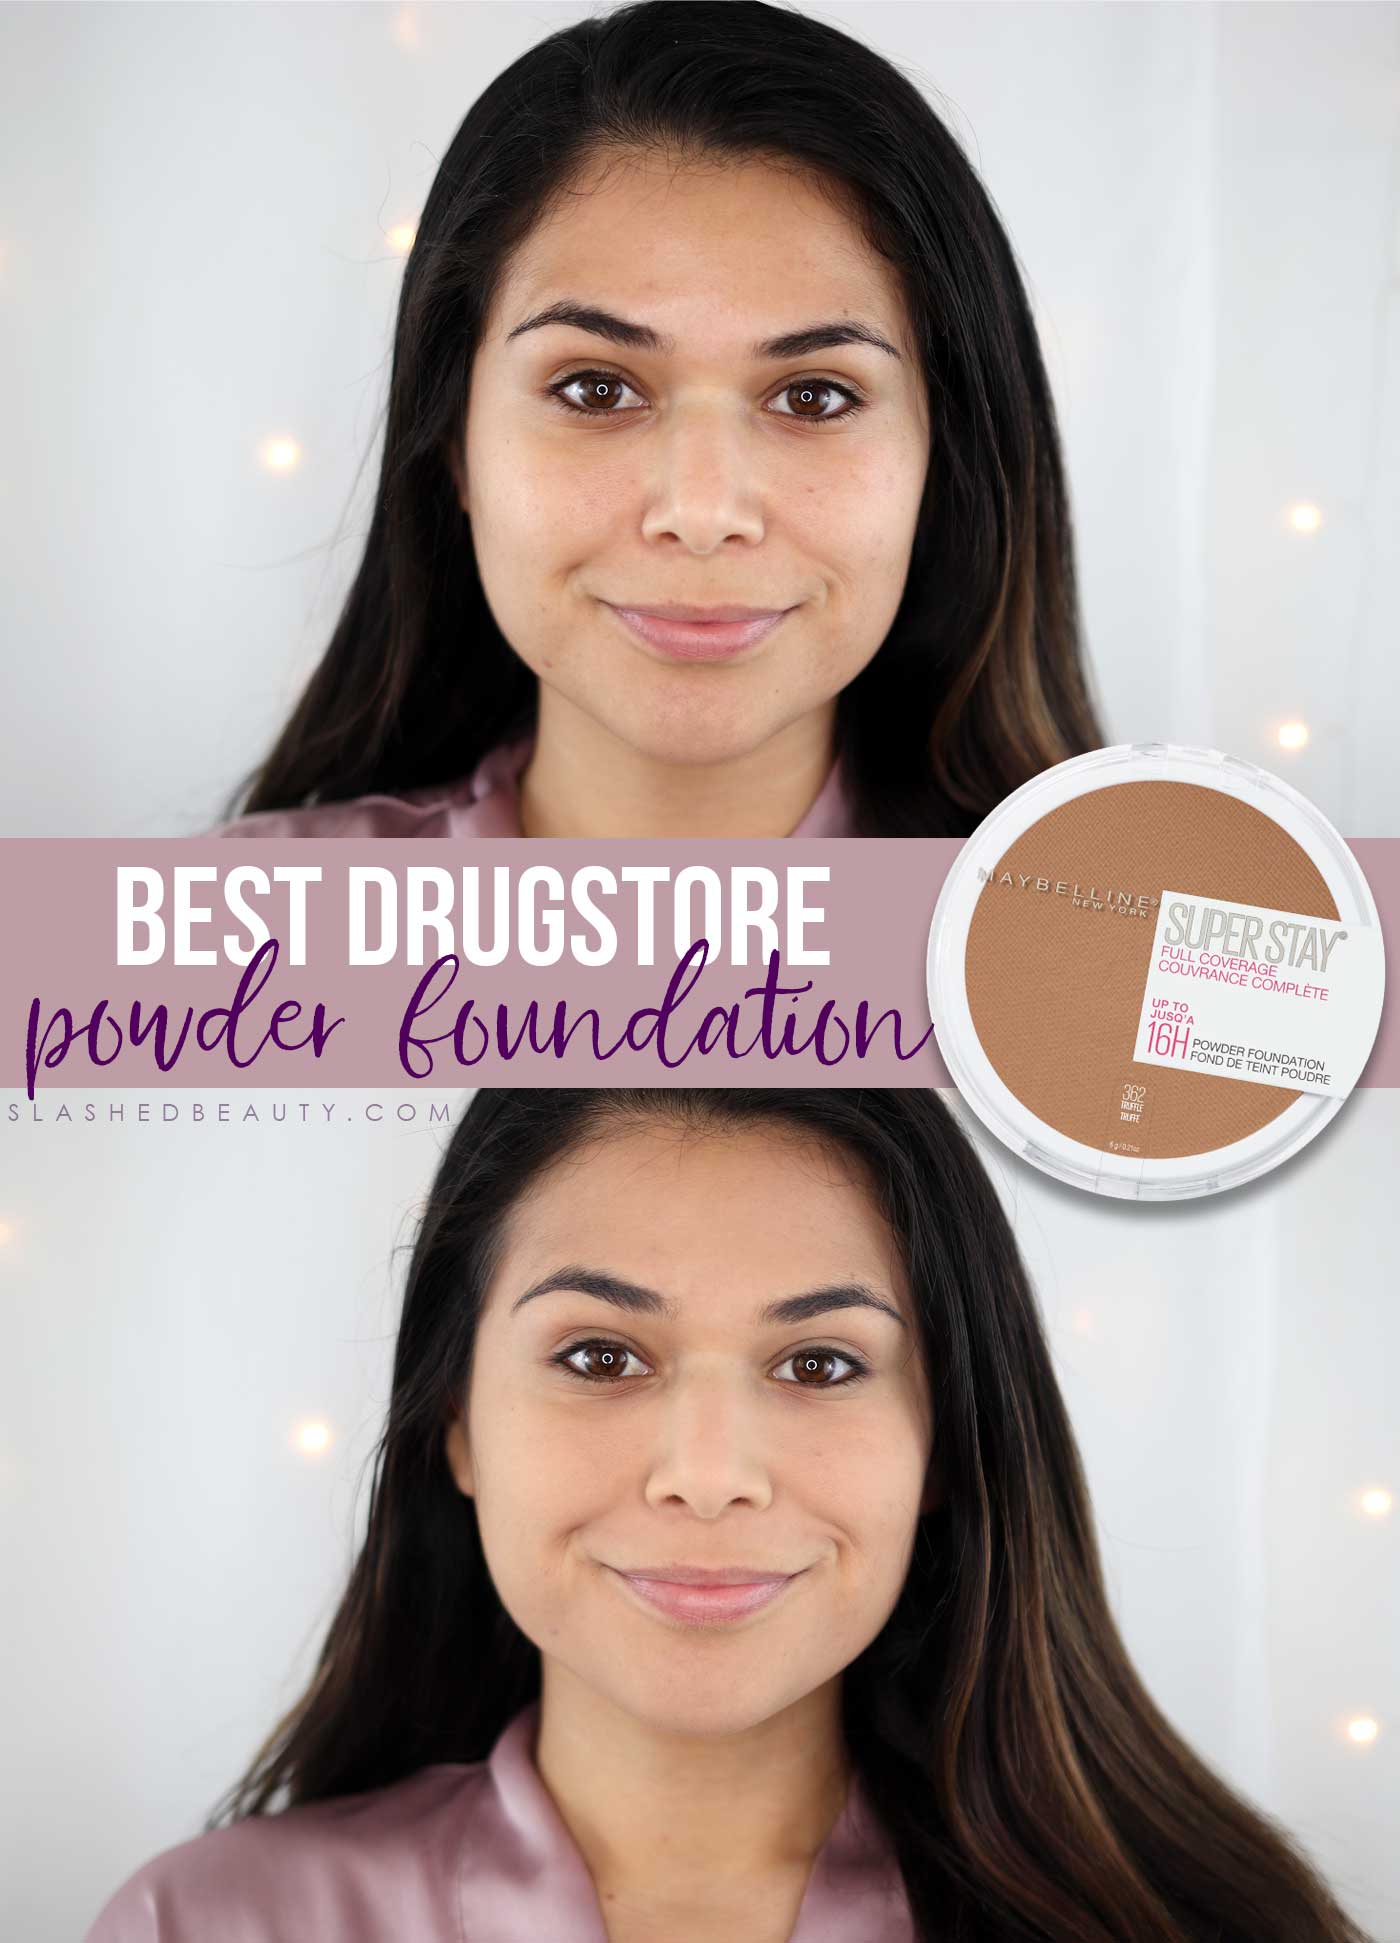 The Best Drugstore Powder Foundation: Maybelline SuperStay Powder Foundation | Review & Before and After | Slashed Beauty